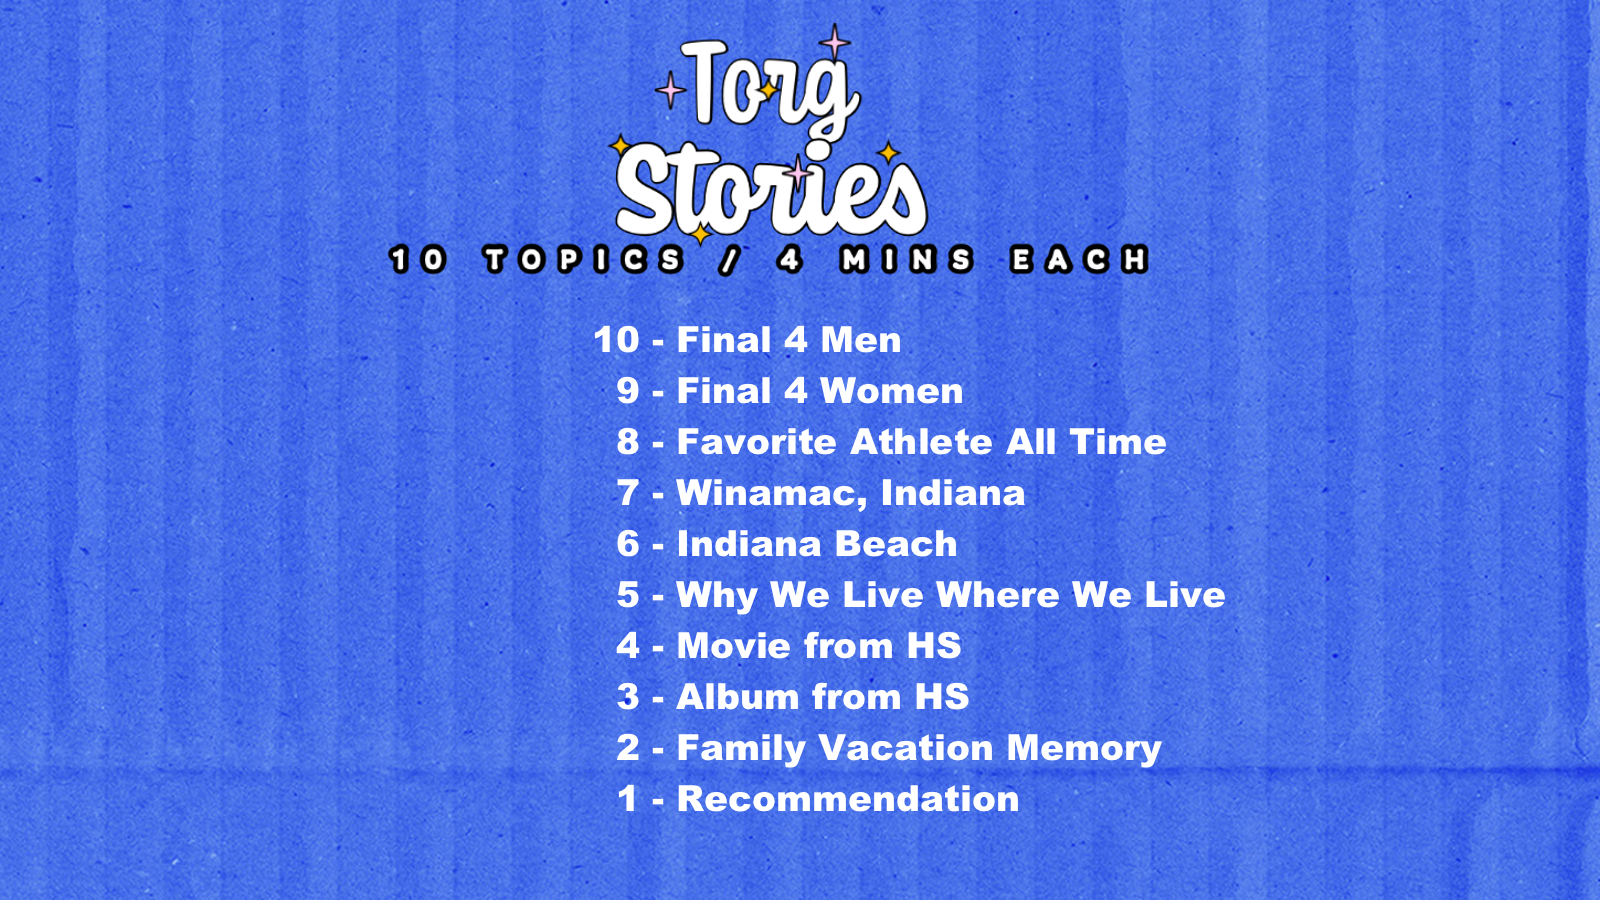 NCAA Final Four, Favorite All Time Athletes, and Movies from HS Among
this Week’s Topics